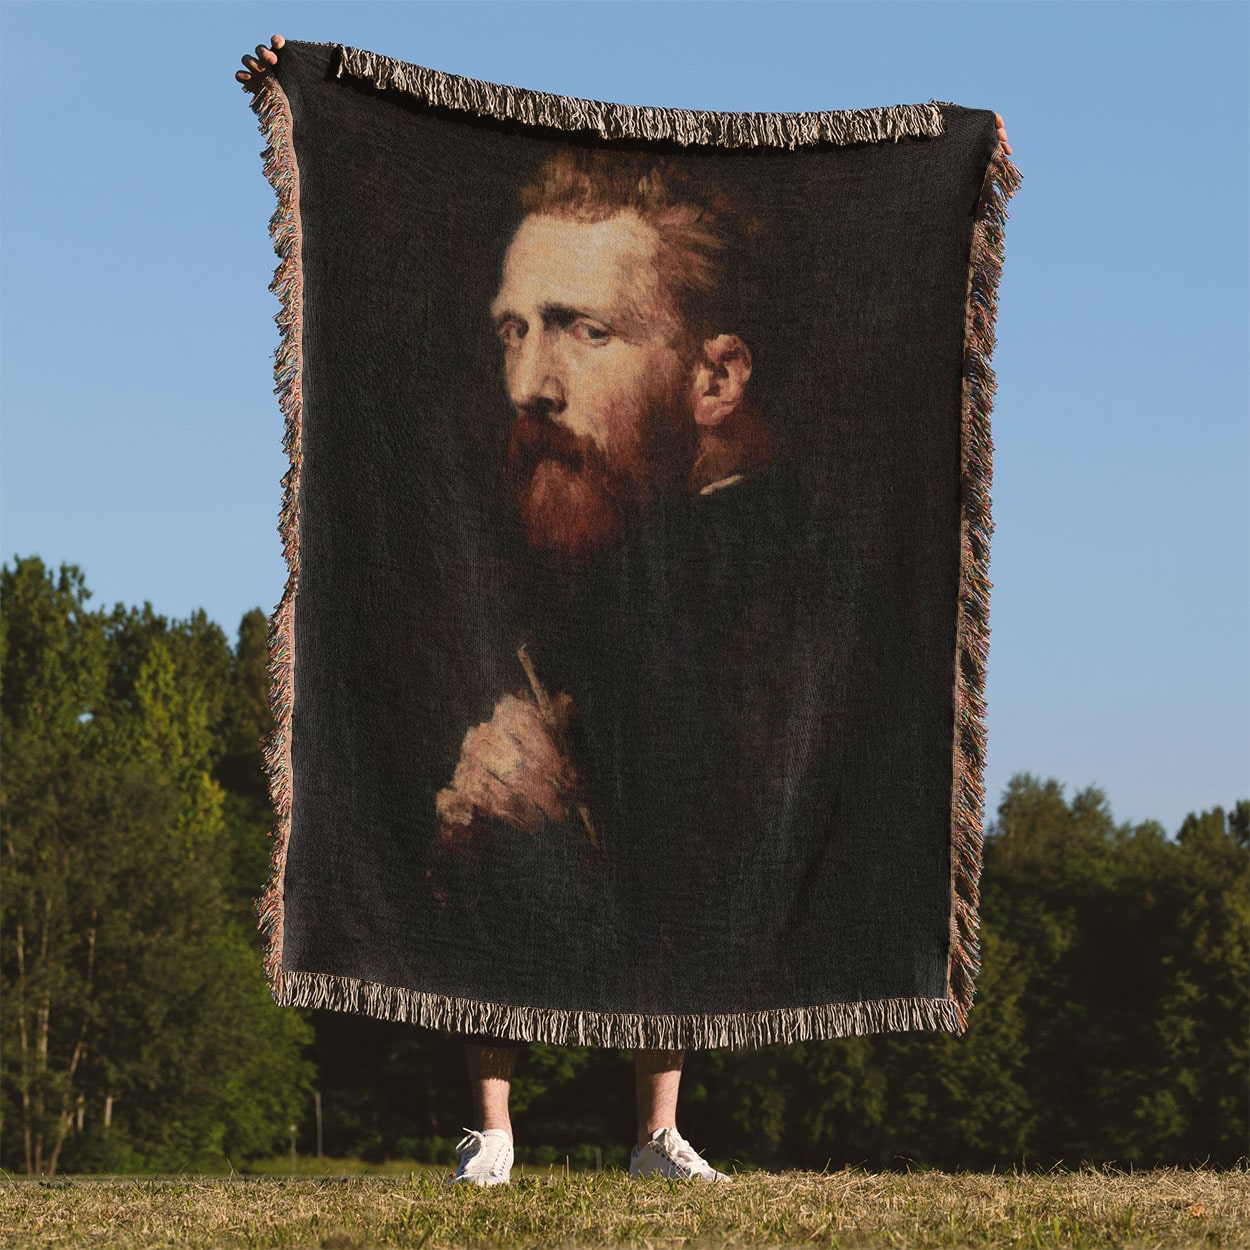 The Painter Woven Blanket Held Up Outside